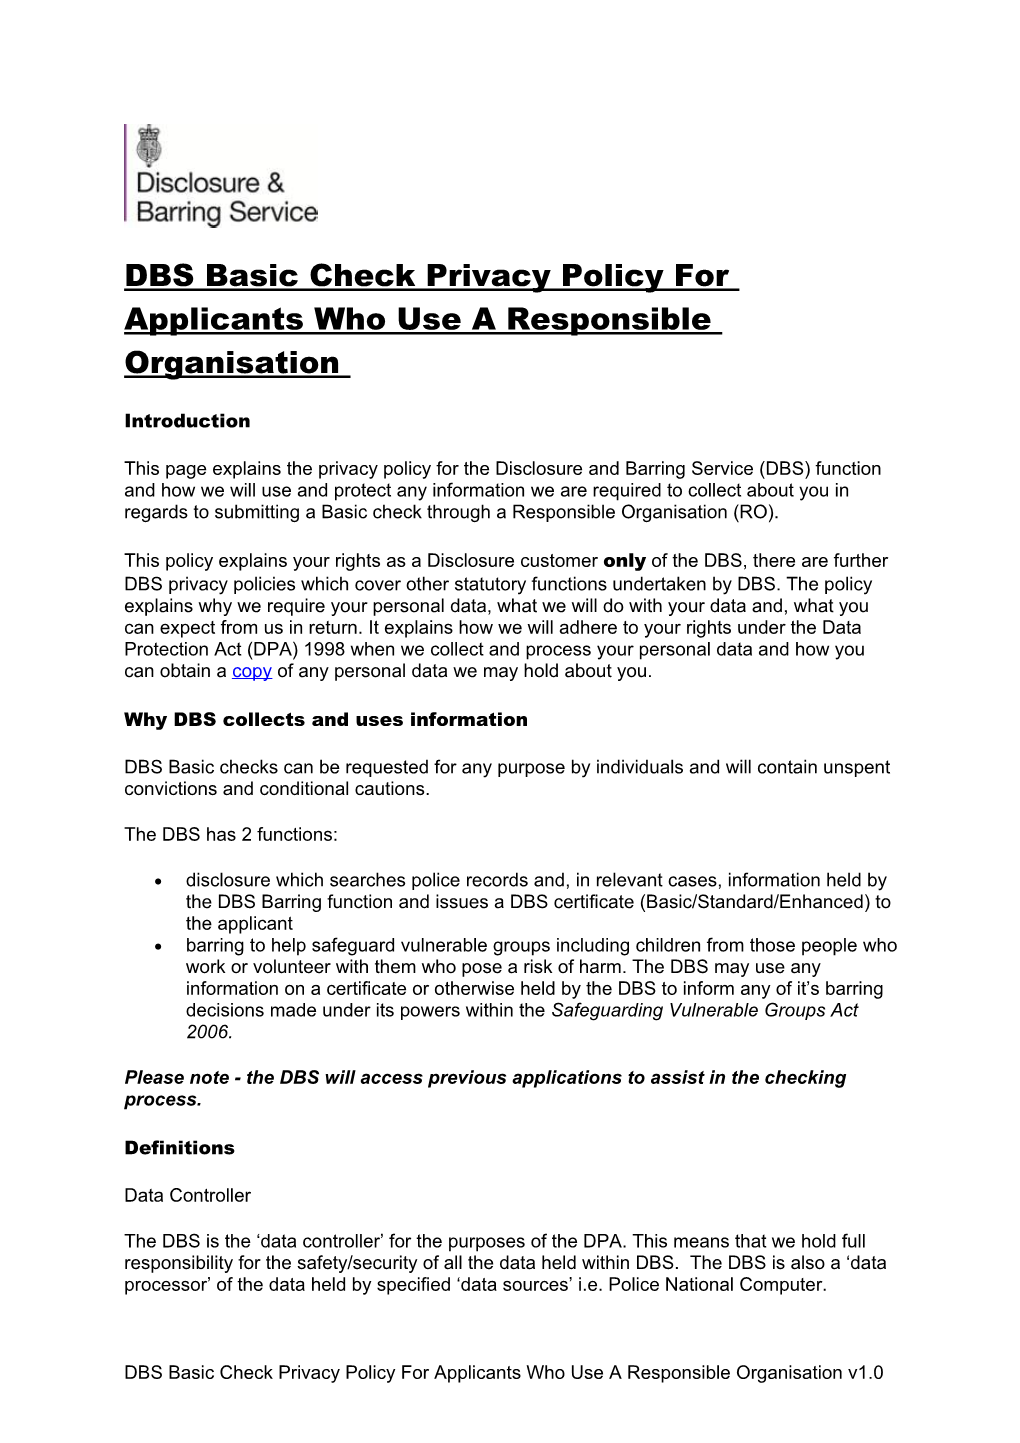 DBS Basic Check Privacy Policy for Applicants Who Use a Responsible Organisation